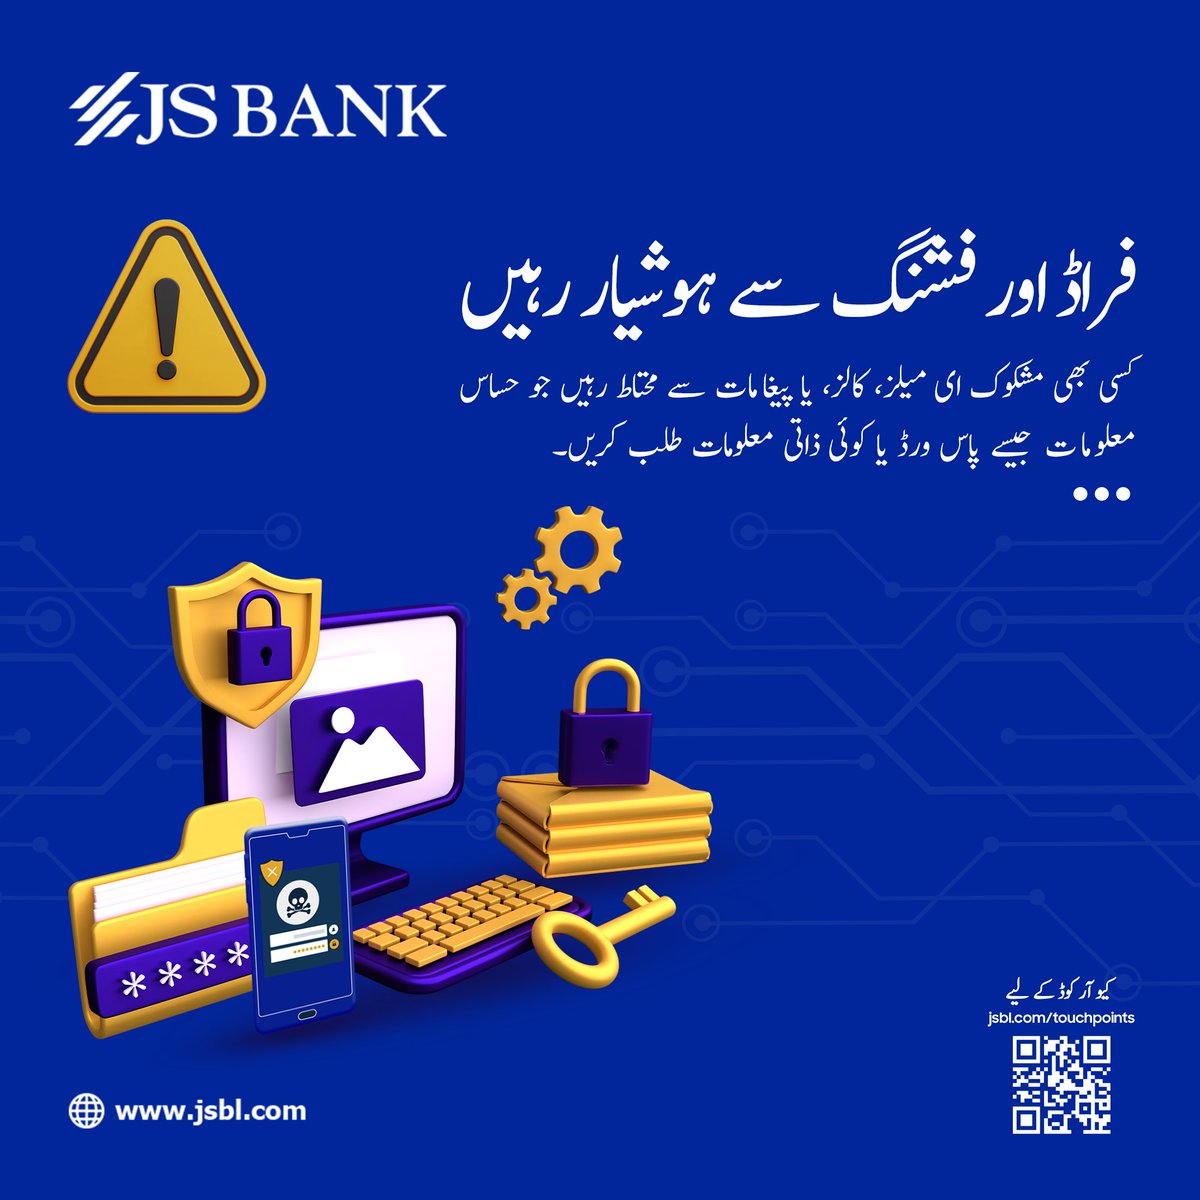 Be careful with emails and calls that seem suspicious and avoid sharing your personal info with anyone. Connect with us through our customer touchpoints: jsbl.com/customer-touch… #JSBank #BarhnaHaiAagay #JSCyberSafe #DigitalFraudProtection